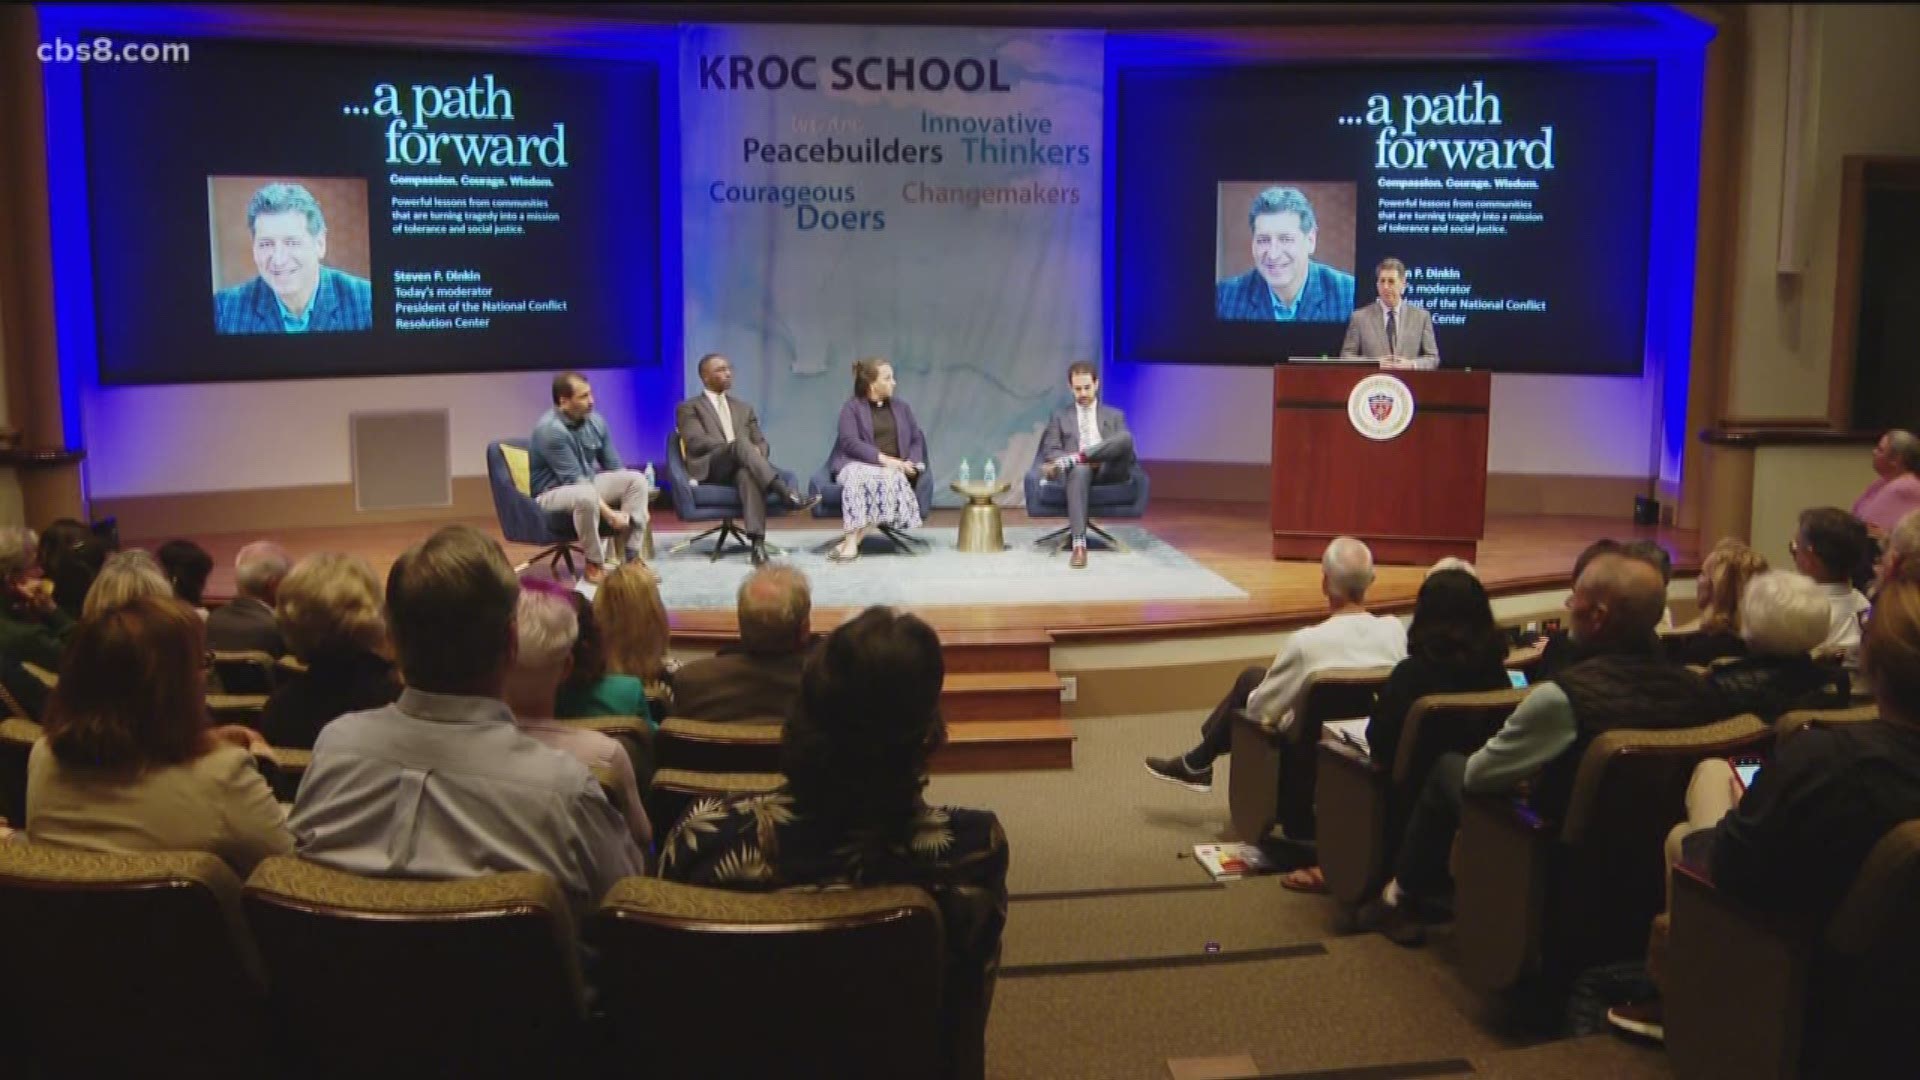 Survivors of mass shootings across the country came together Wednesday night in San Diego to talk about ways to overcome fear and hatred. Survivors shared the lessons they've learned from dealing with crisis and tragedy at a free public forum at the University of California San Diego.